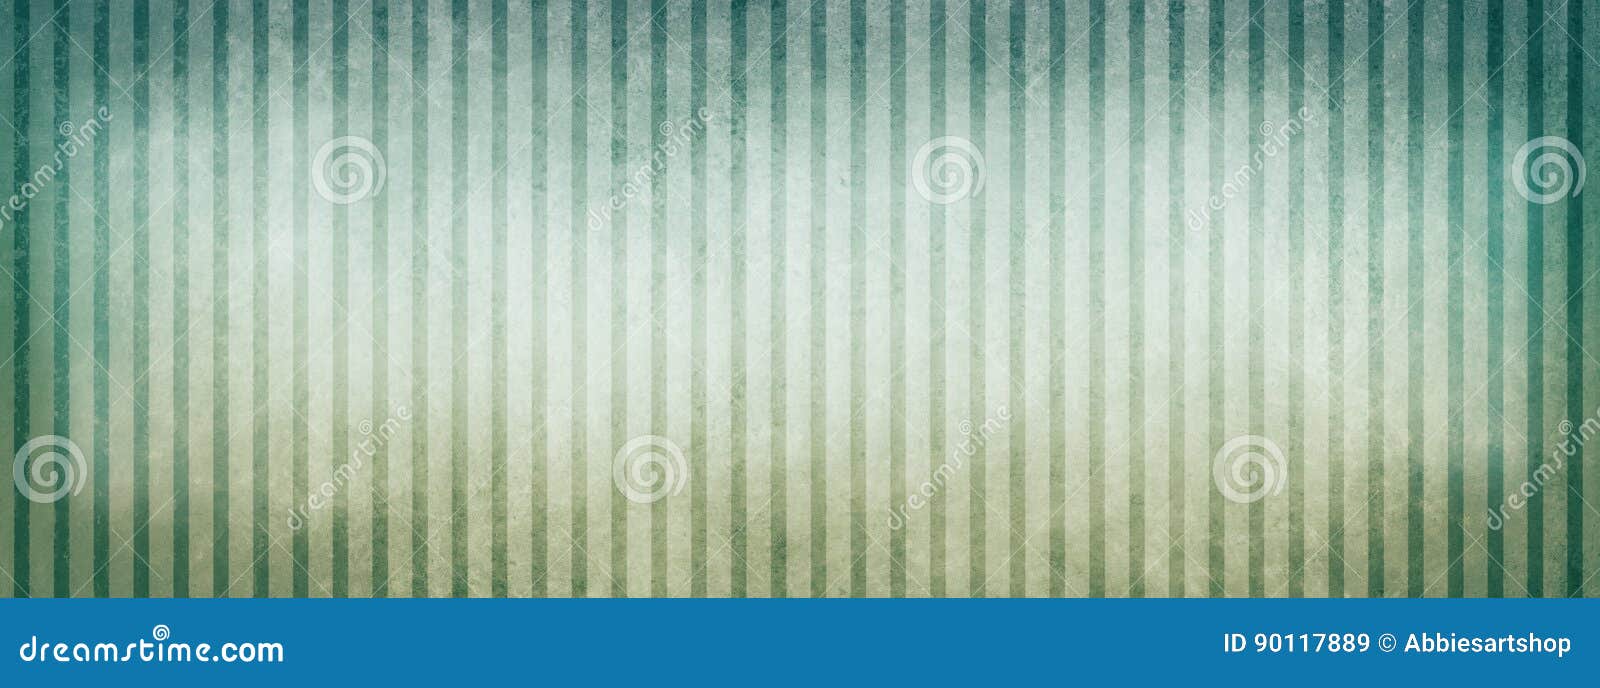 blue green and white beige striped background with vintage texture  and vignette borders